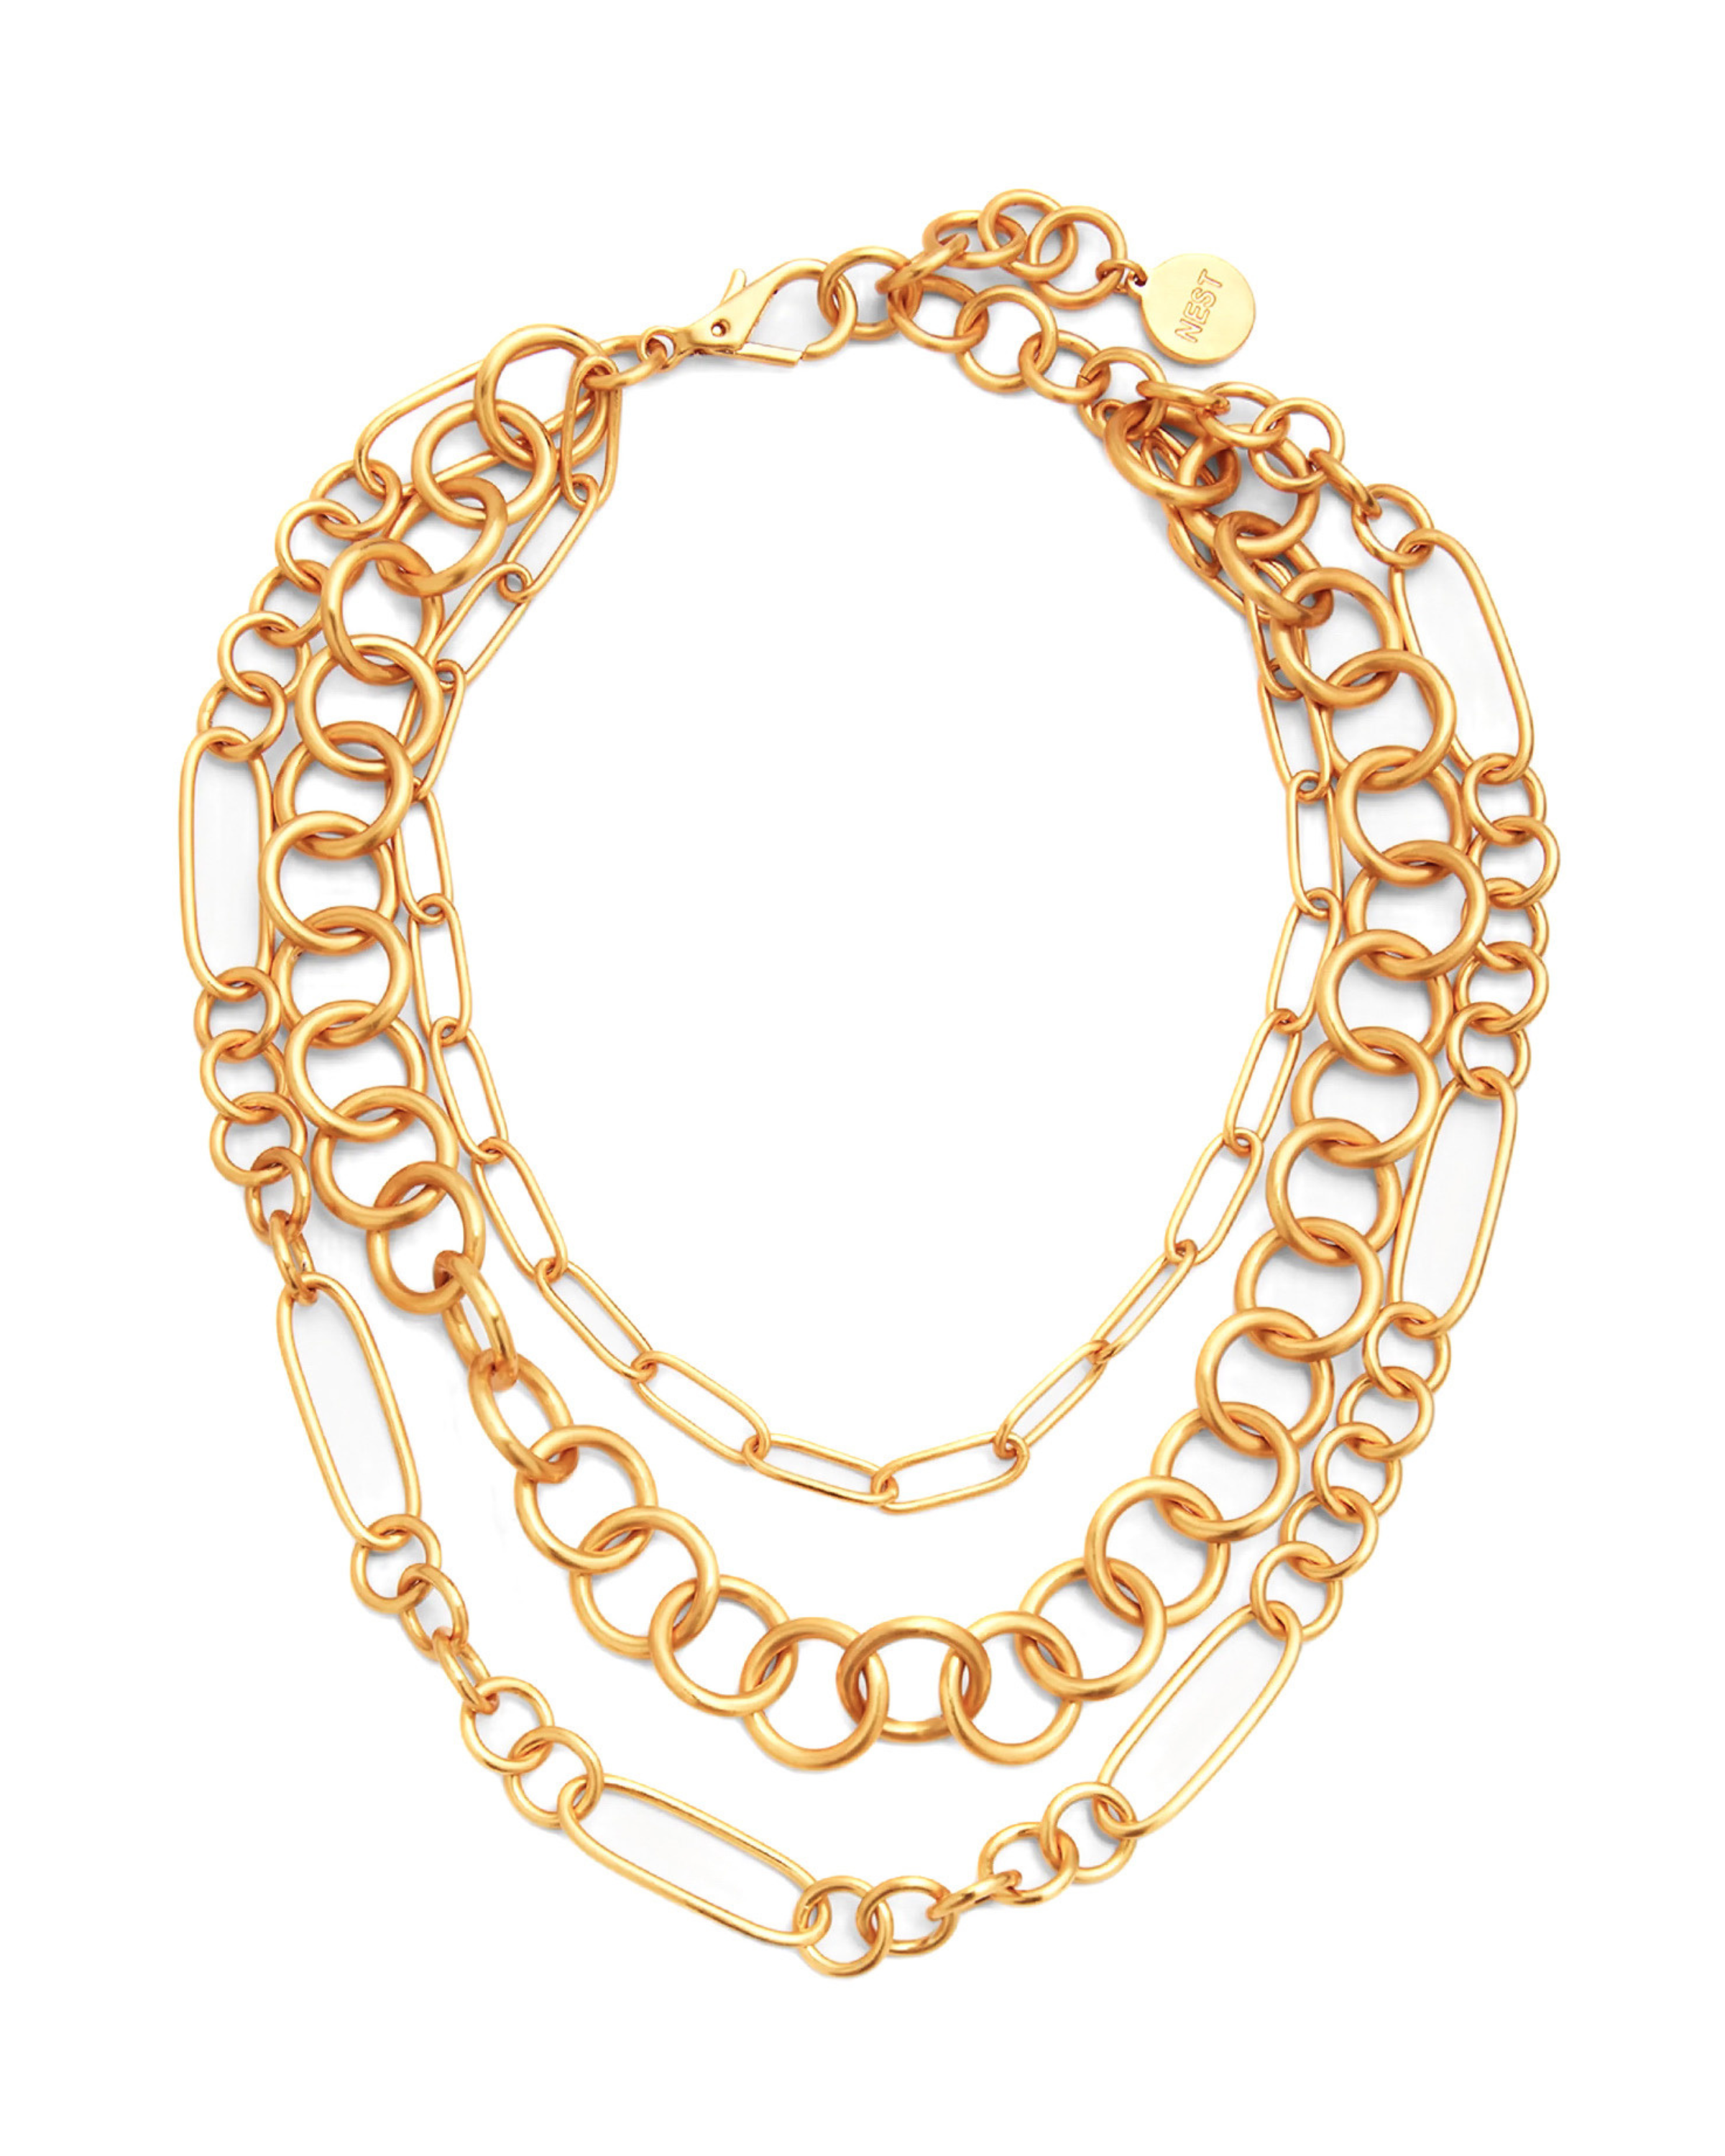 Brushed Gold Multi Chain Statement Necklace